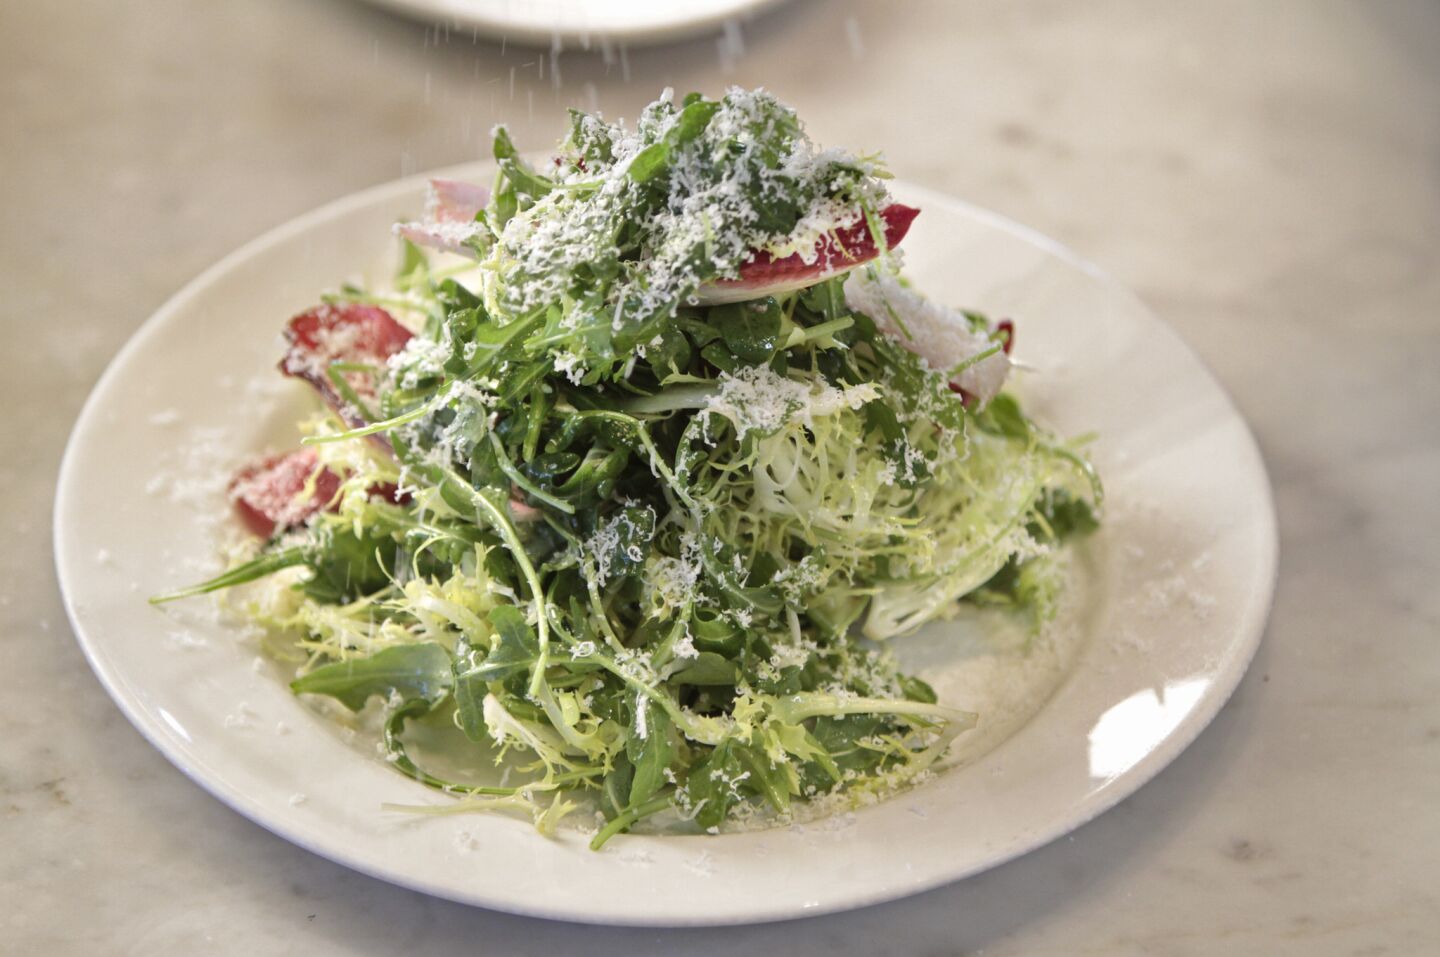 Try the tricolore salad from Nancy Silverton. A simple yet colorful blend of nicely assertive lettuces (arugula, frisee and endive), the salad is tossed with a homemade anchovy dressing and topped with a sprinkling of freshly grated Parmigiano-Reggiano.